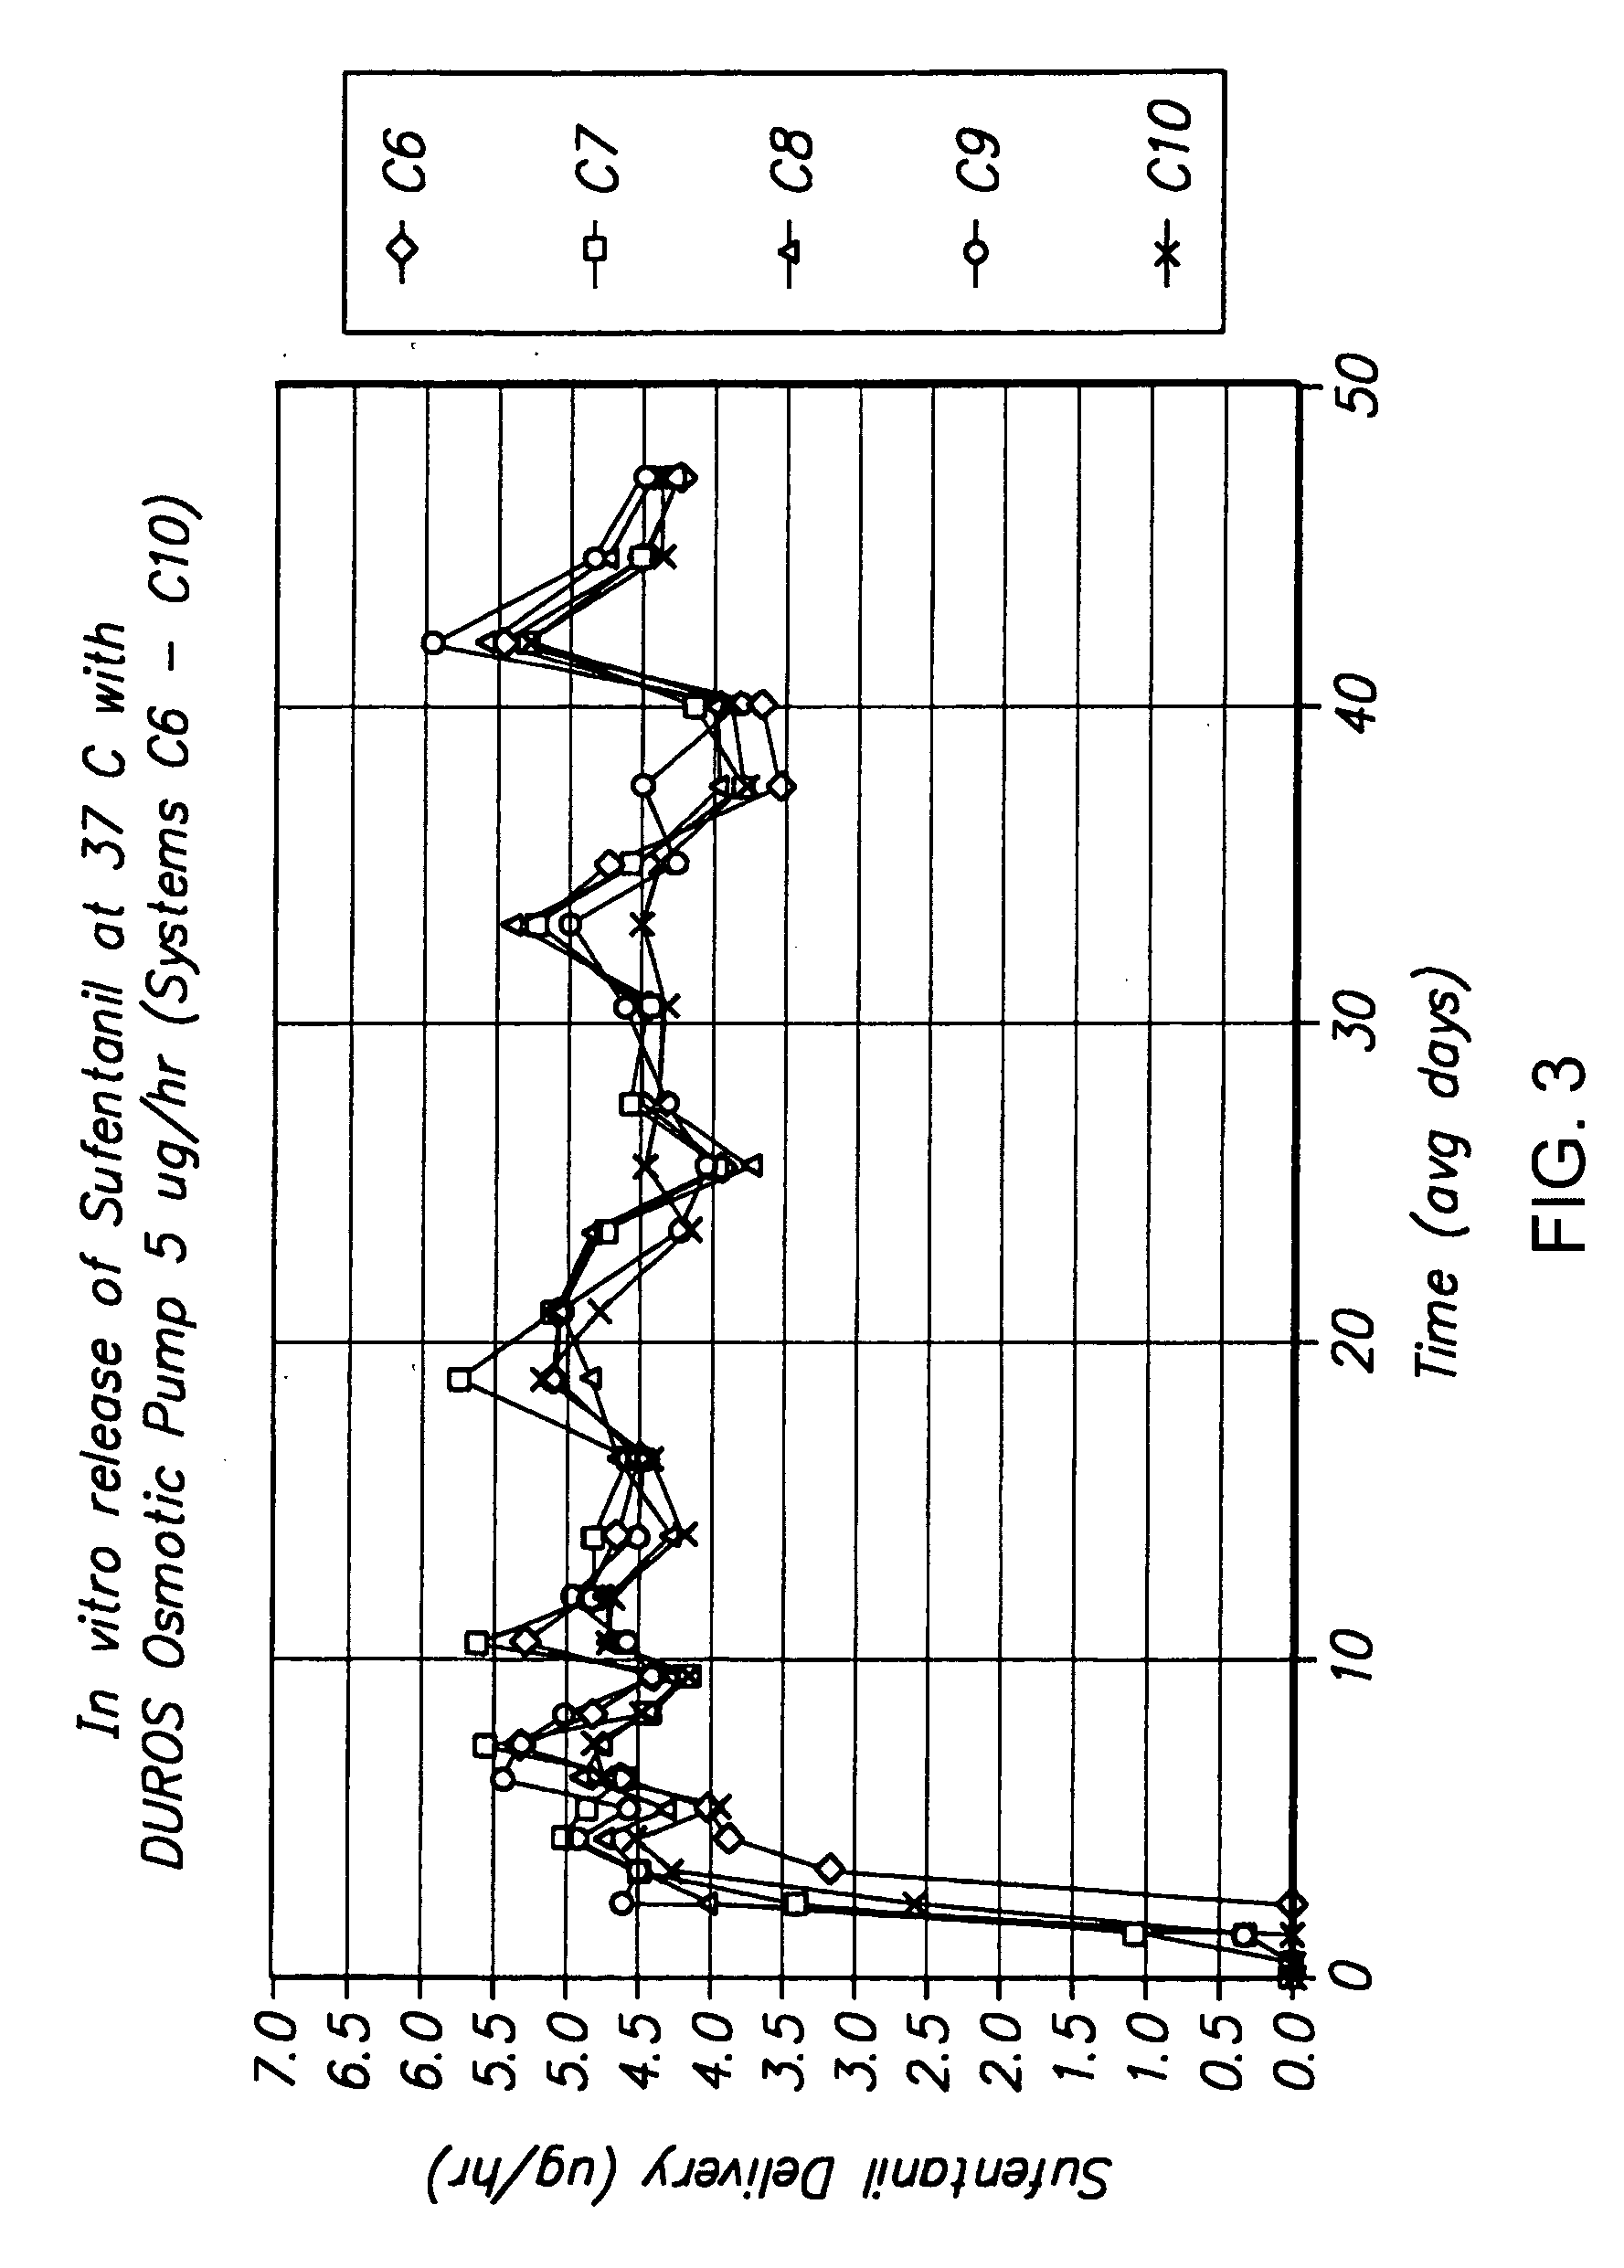 Implantable devices and methods for treatment of pain by delivery of fentanyl and fentanyl congeners